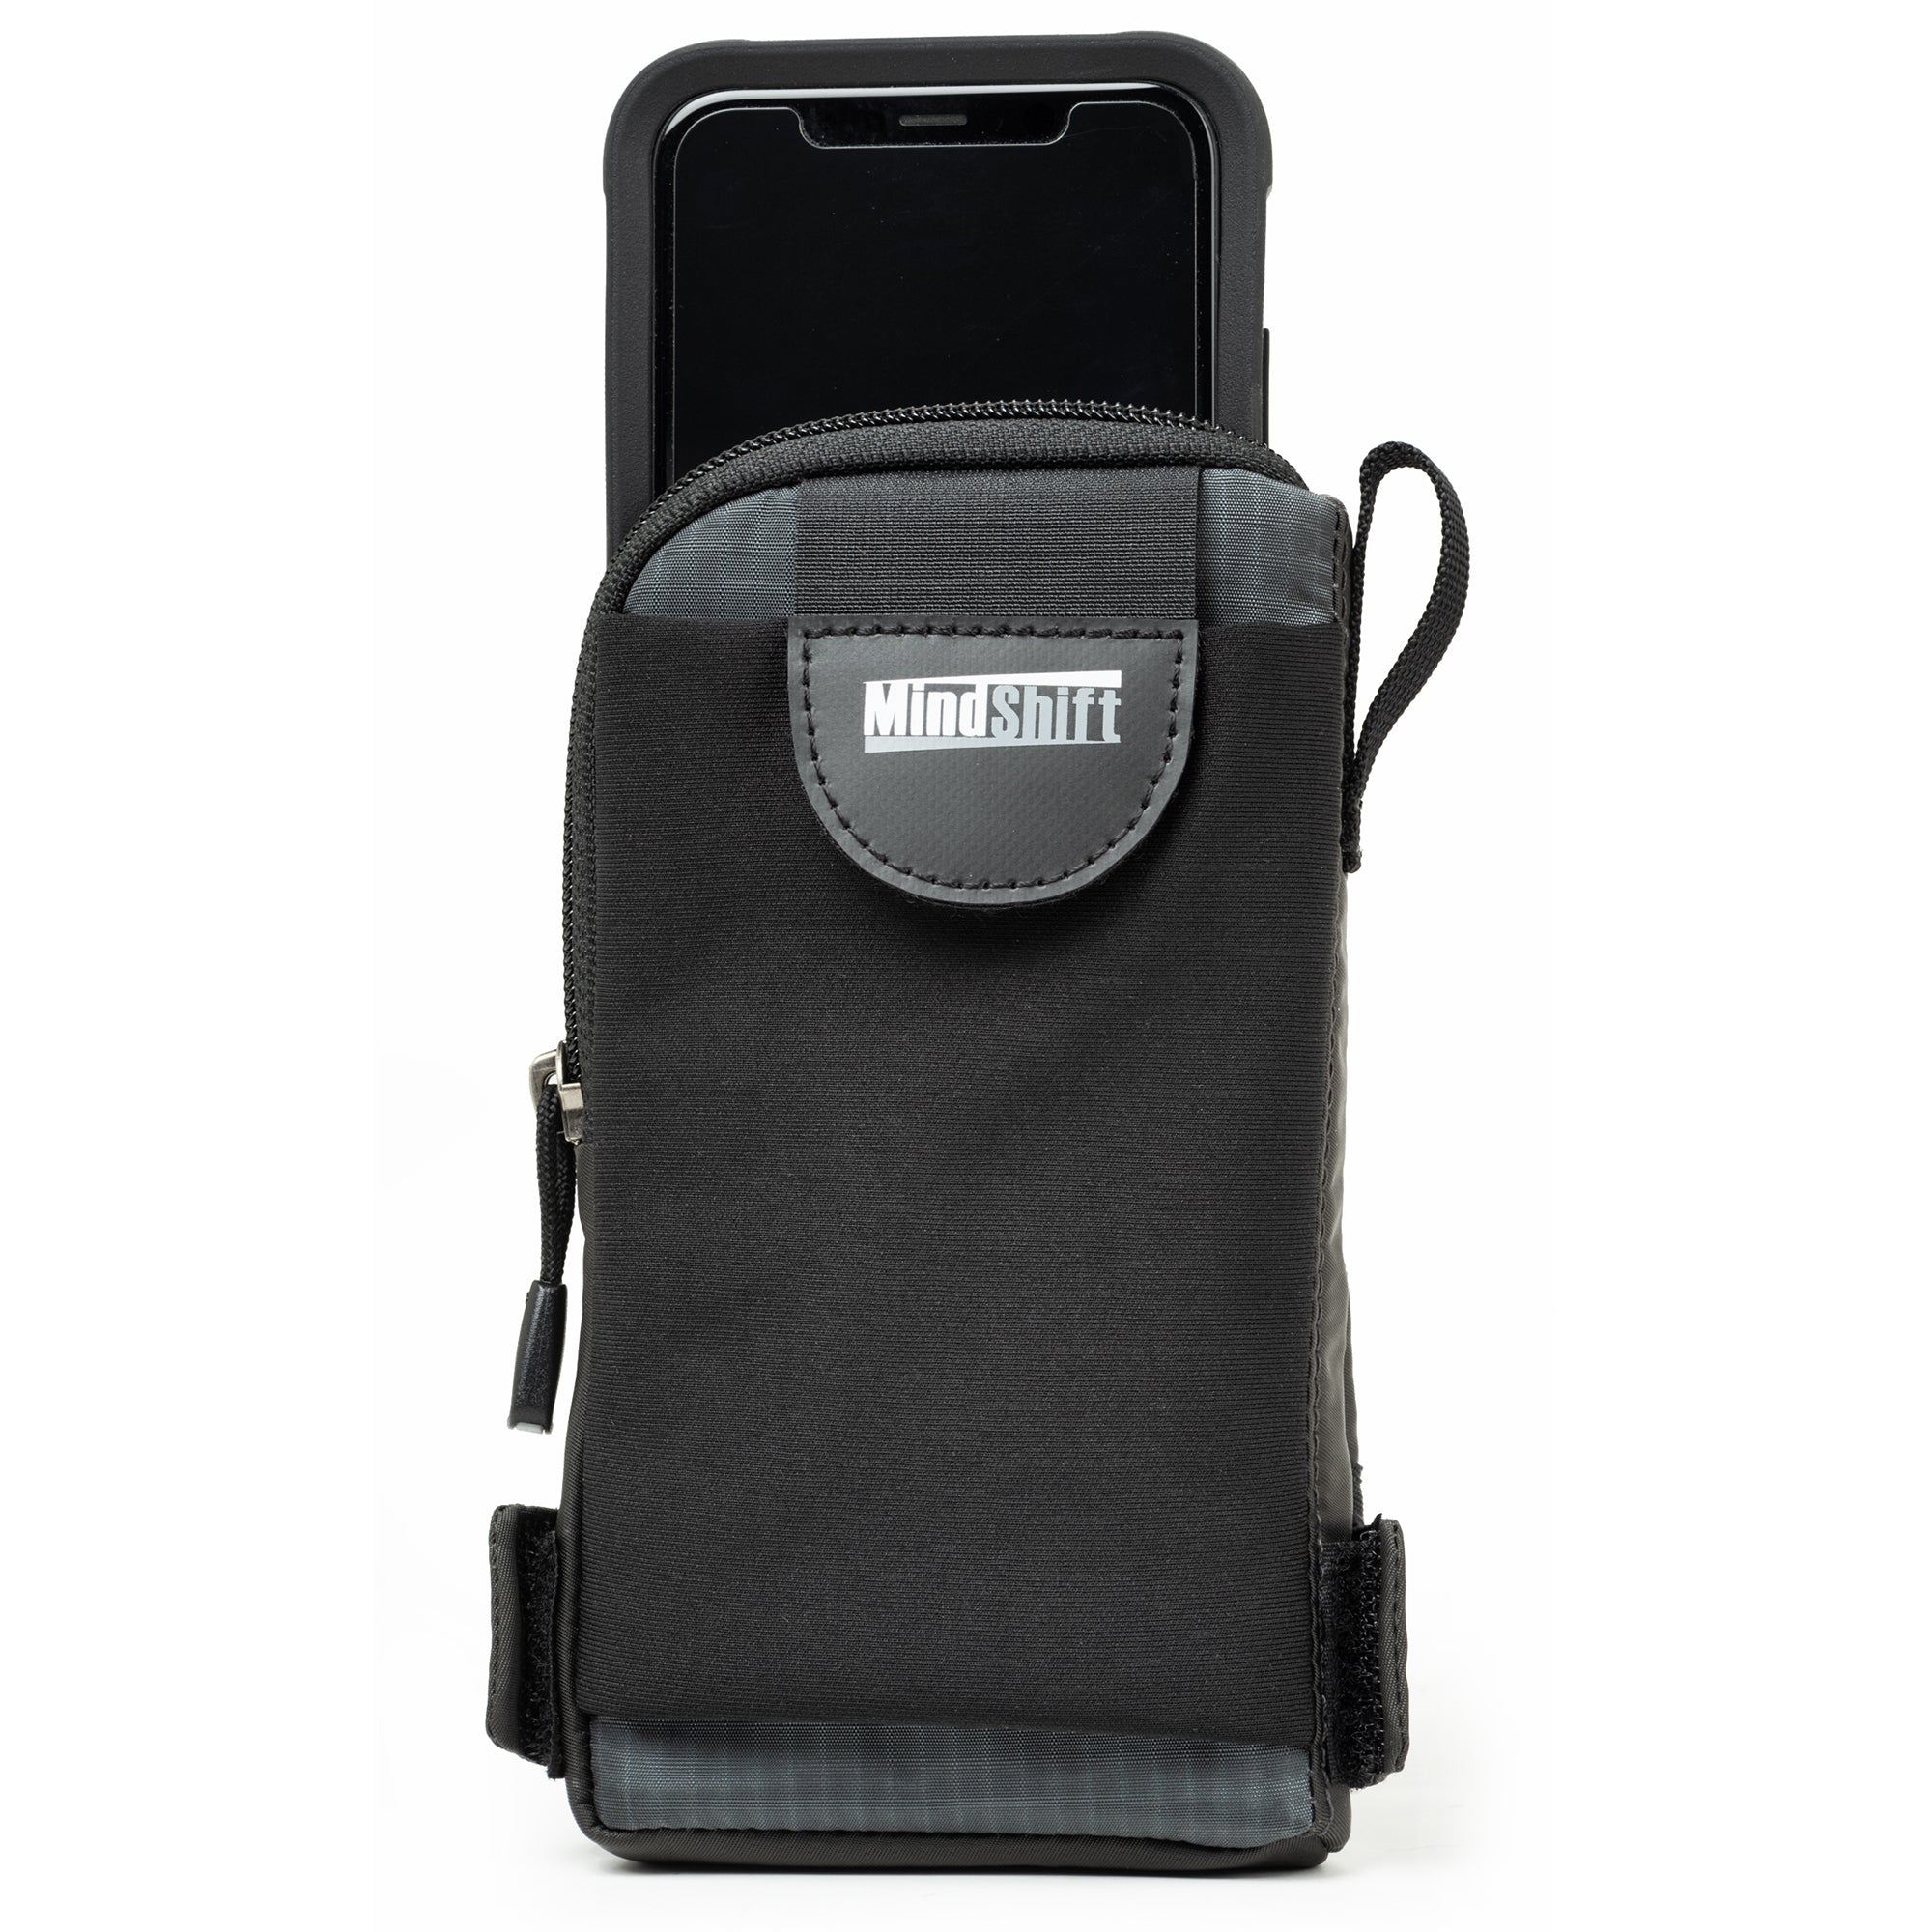 USA Made Dual Phone Holster Carries 2 EXTRA LARGE Phones - Horizontal Black Leather  Pouch with Heavy